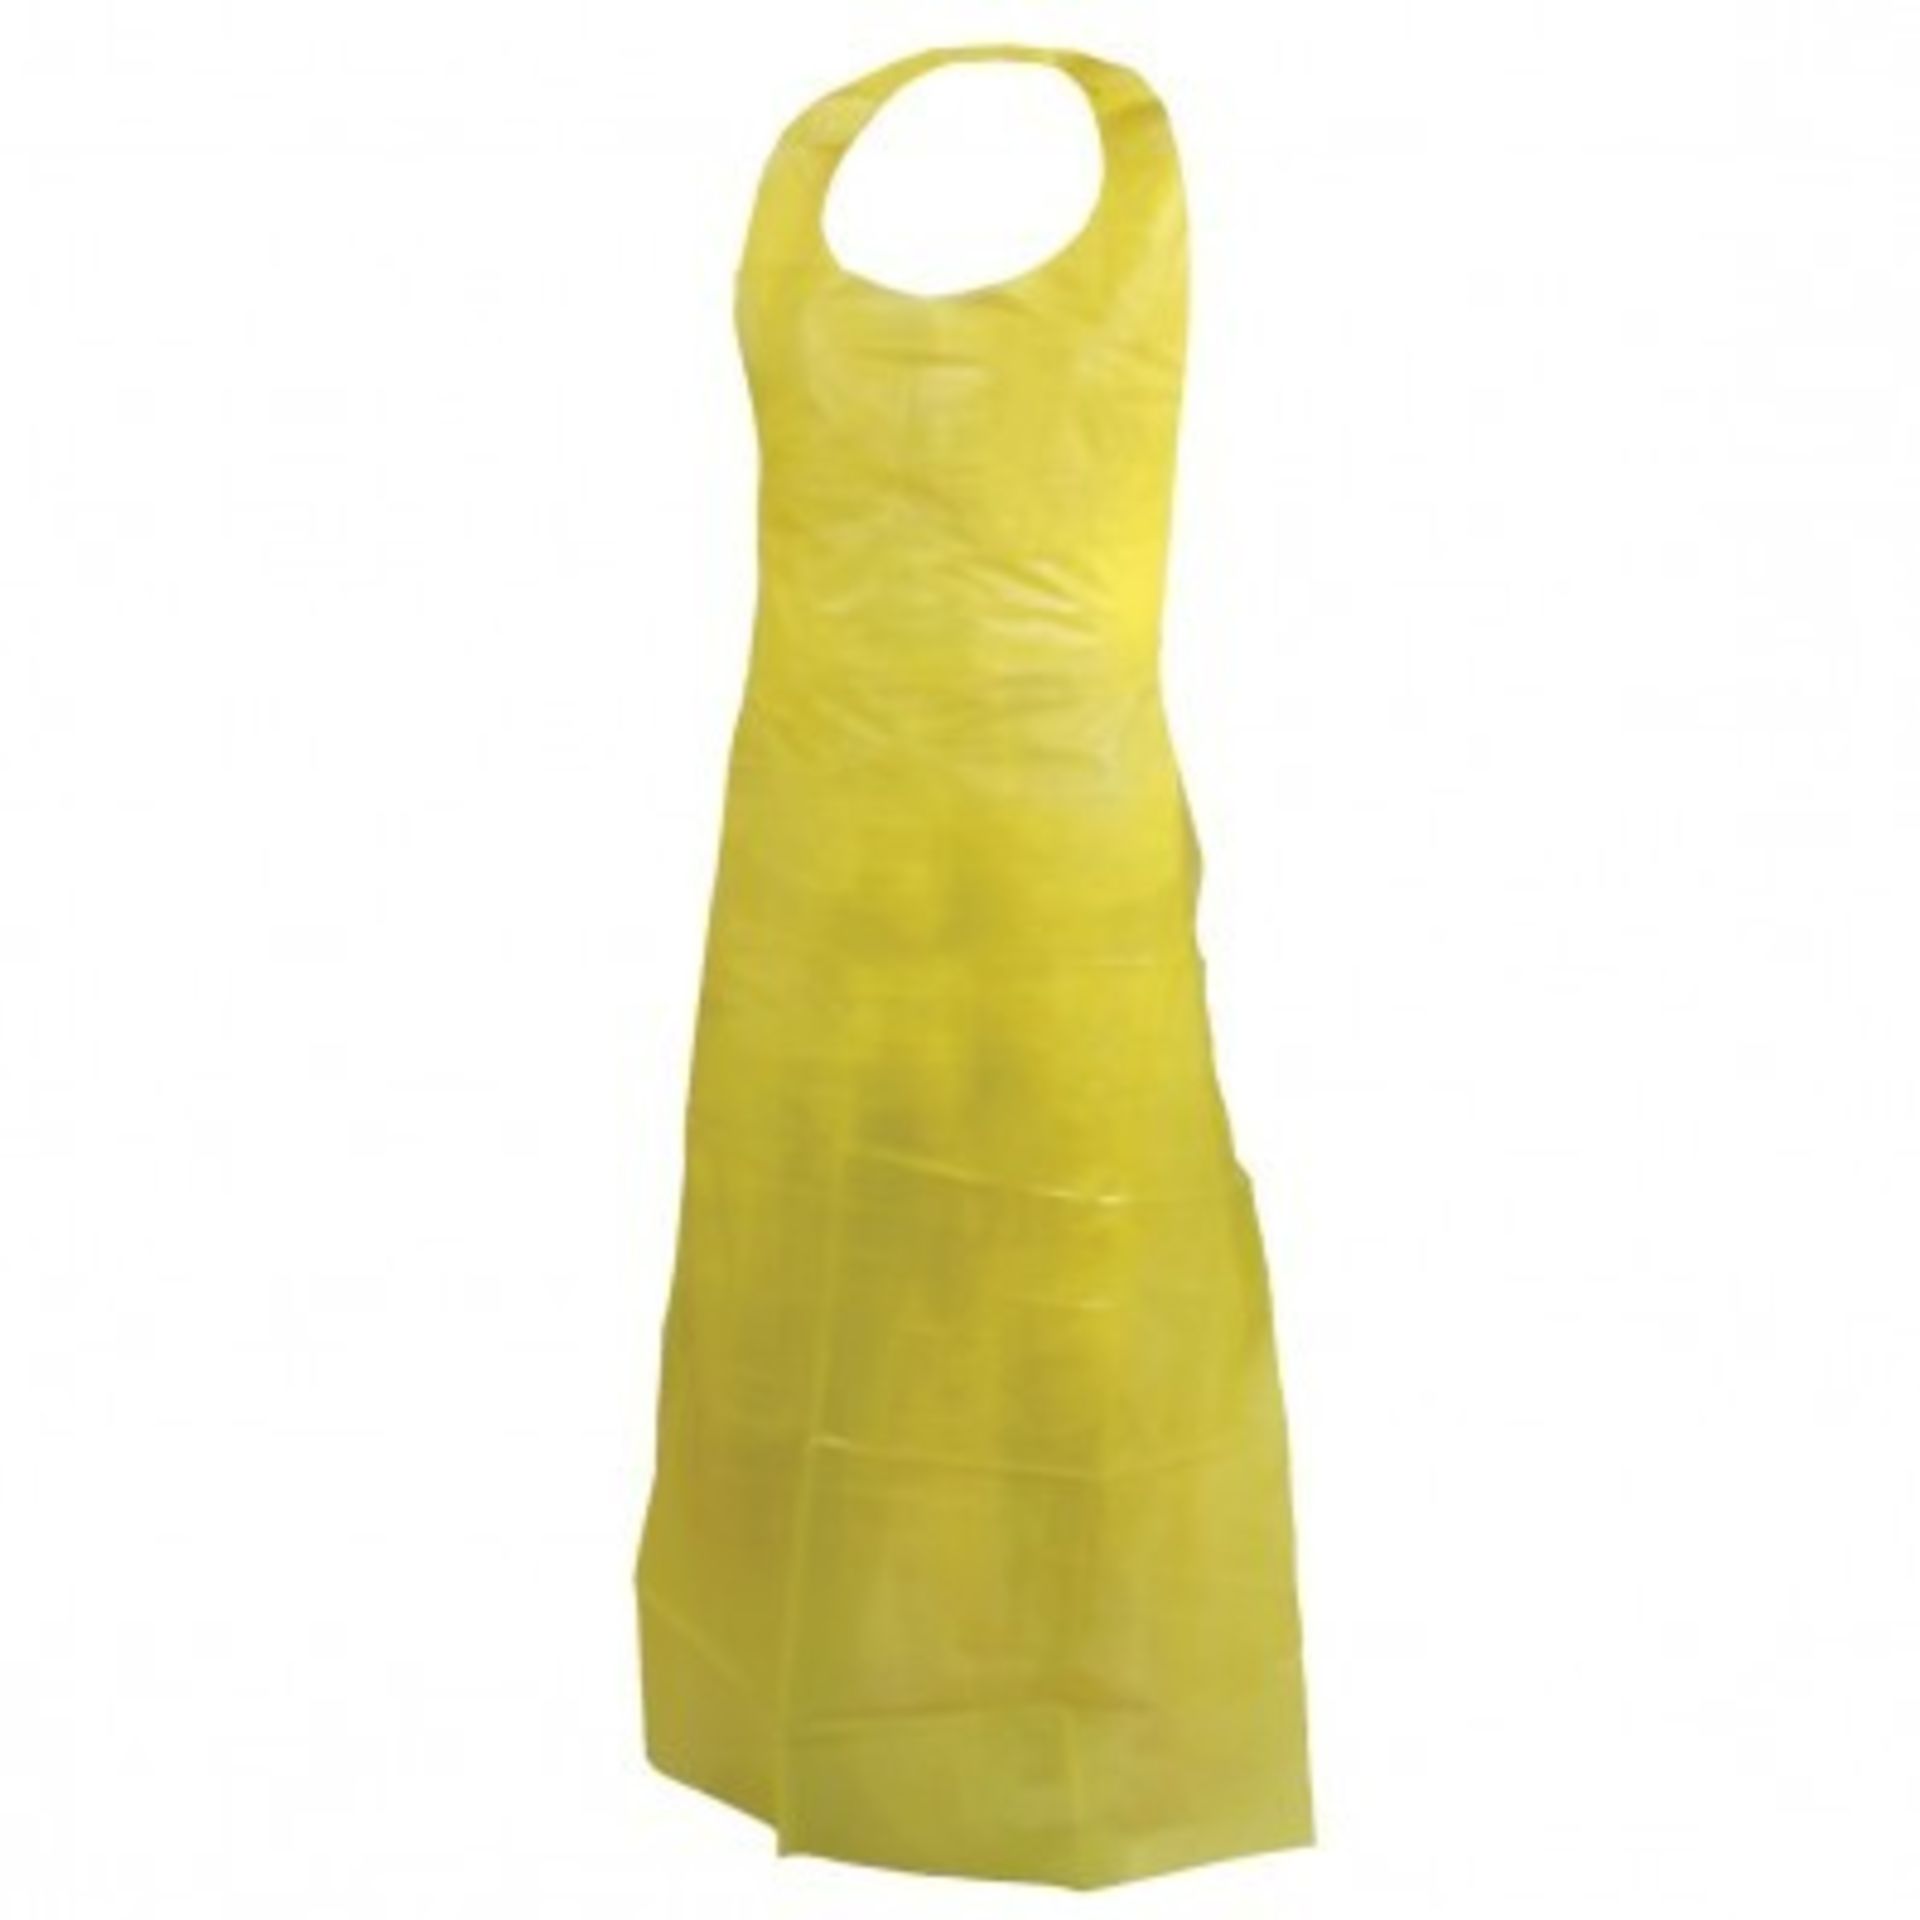 V Brand New Lot Of 4 Pack Of 200 Green Aprons (20 Micron 69x107cm) and 2 Packs Of 200 Yellow - Image 2 of 2